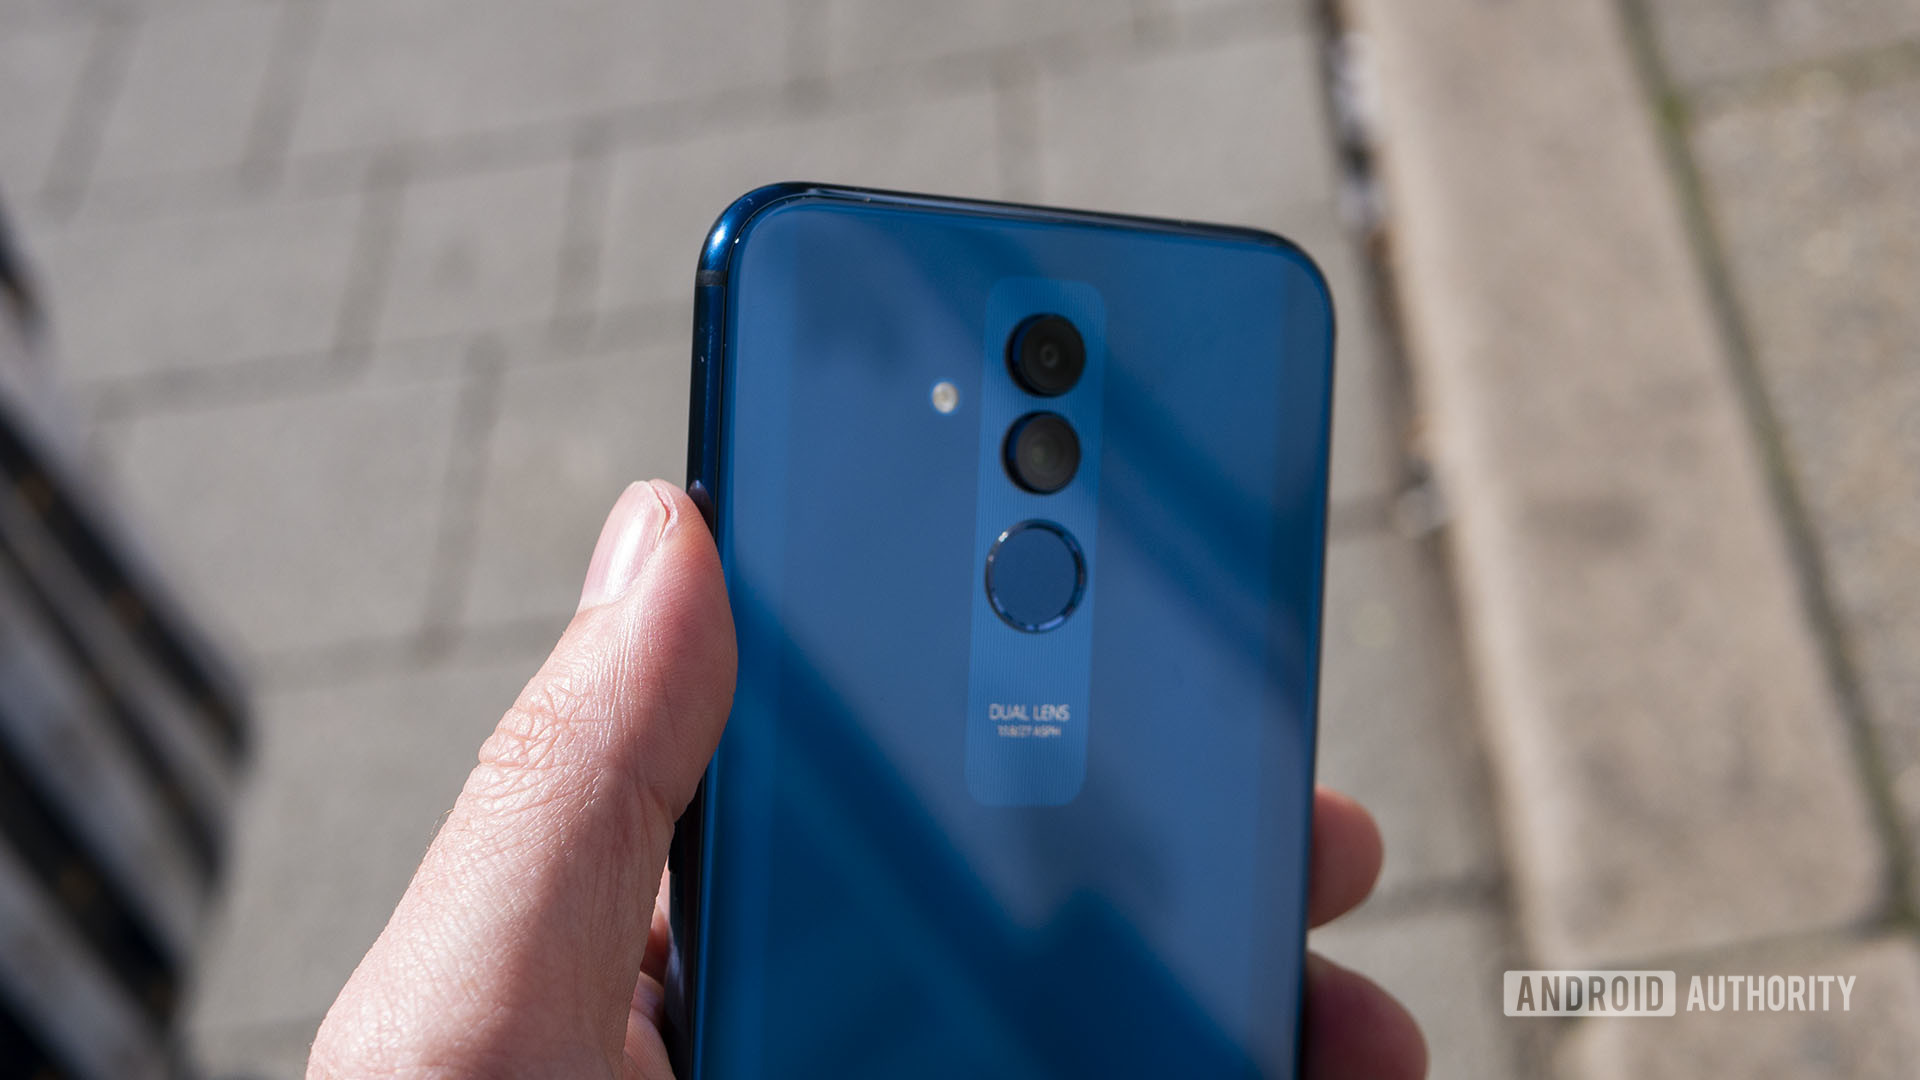 They are Exemption fuse Huawei Mate 20 Lite review: Not so smart - Android Authority